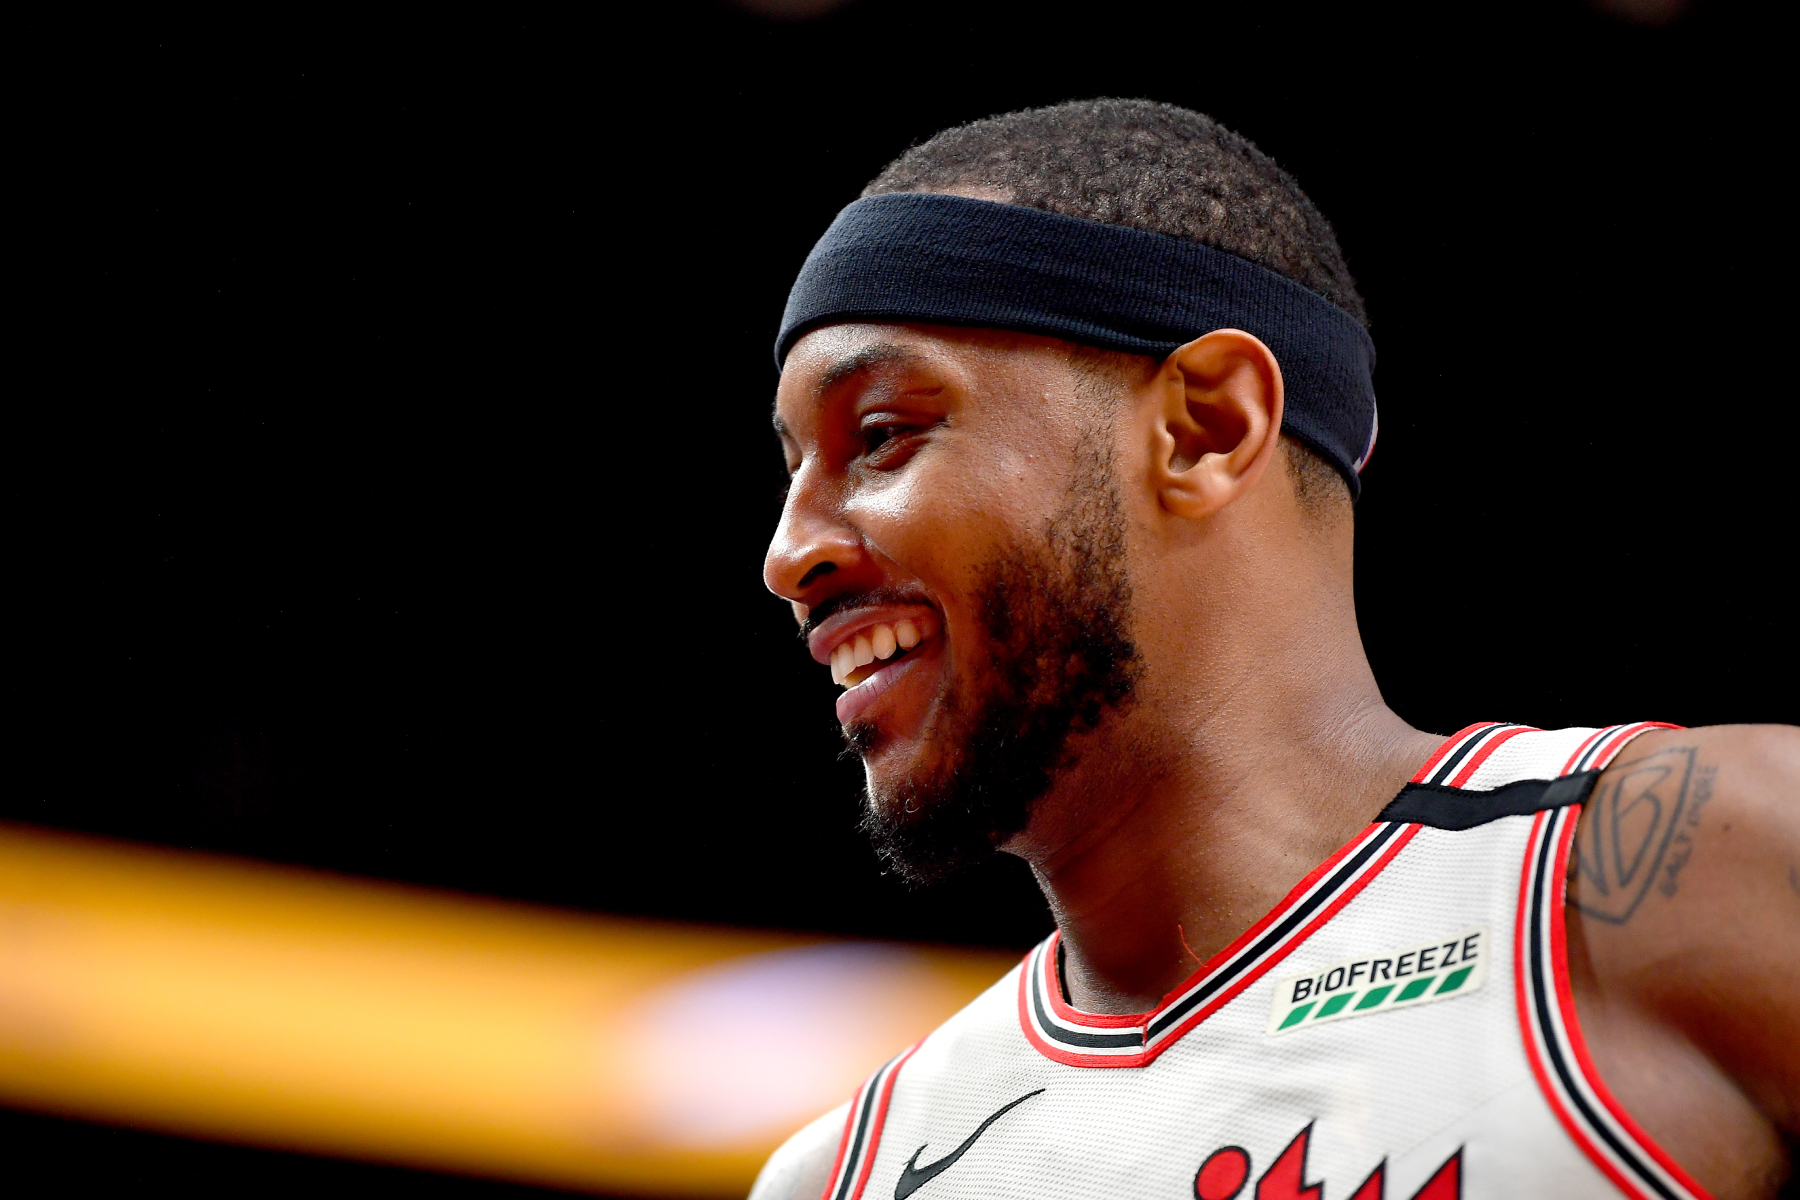 Carmelo Anthony played really well for the Portland Trail Blazers this season. So, what's next for Anthony in his NBA career?